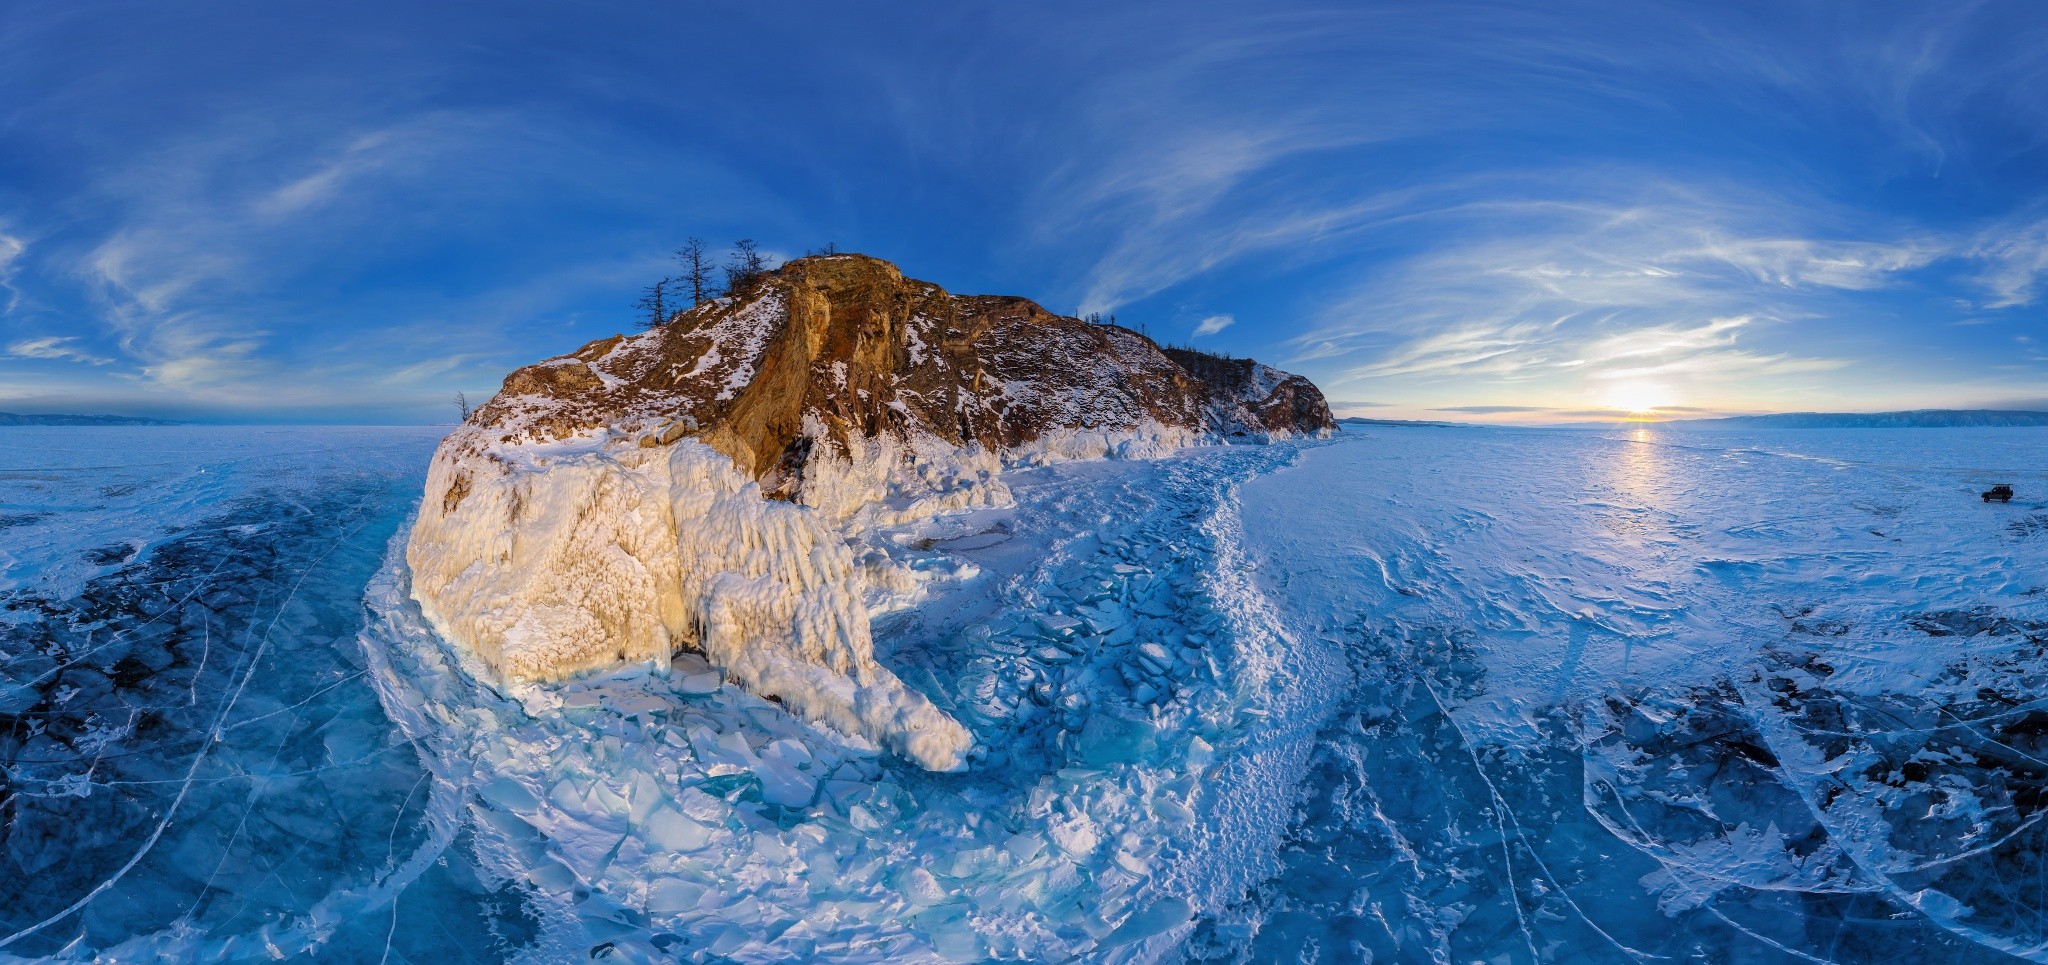 General 2048x965 Lake Baikal winter ice frost lake clouds island sunset panorama trees Jeep nature landscape Russia